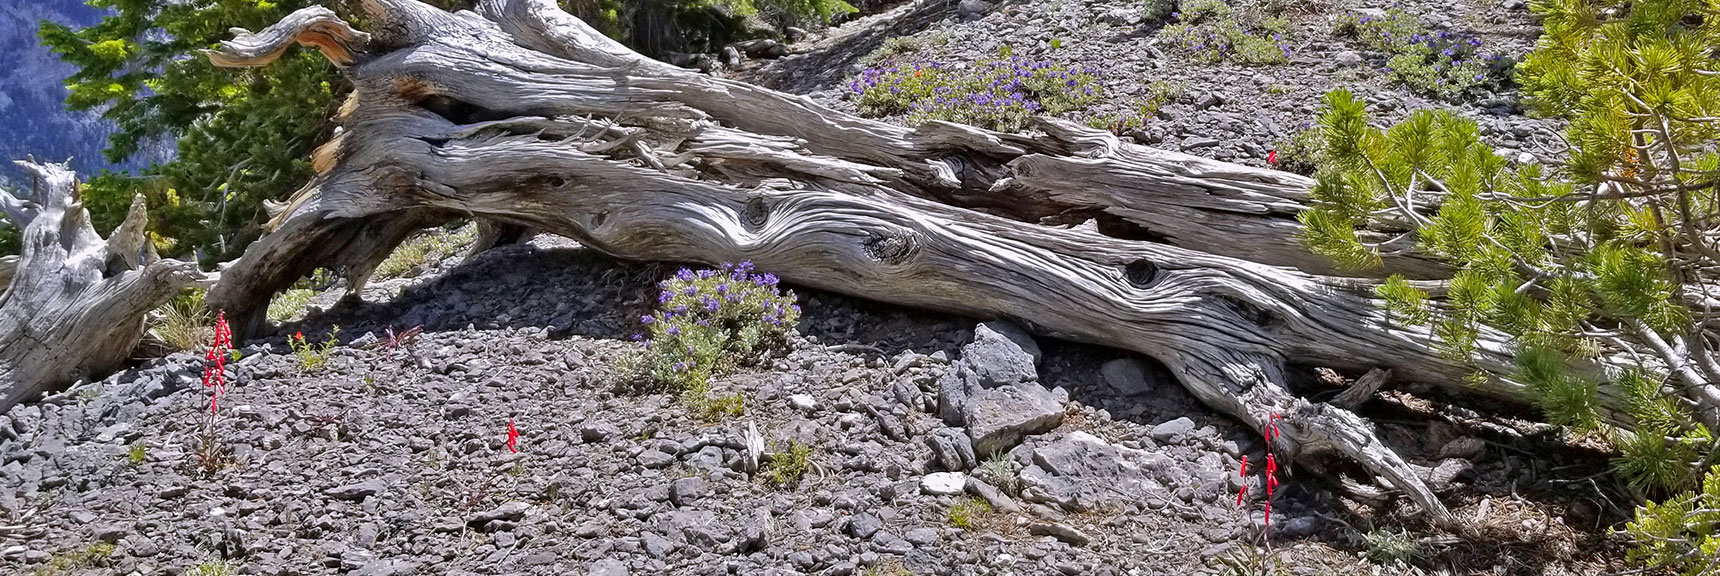 More Wild Flowers on the Upper Ridge | Black Rock Sister | Mt Charleston Wilderness | Lee Canyon | Spring Mountains, Nevada